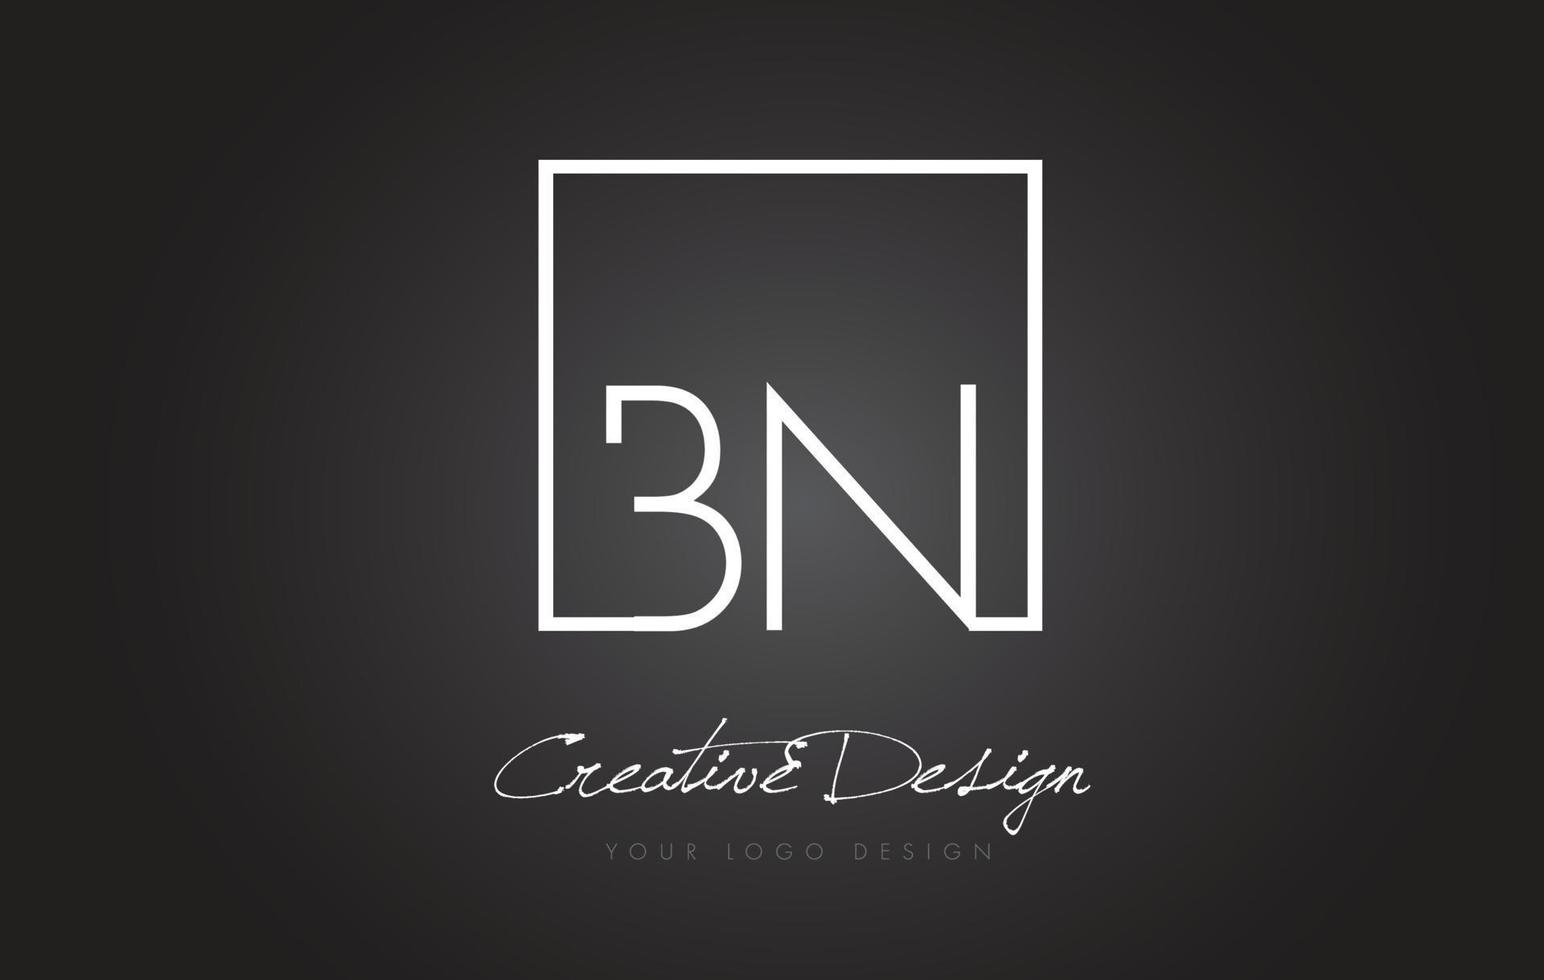 BN Square Frame Letter Logo Design with Black and White Colors. vector